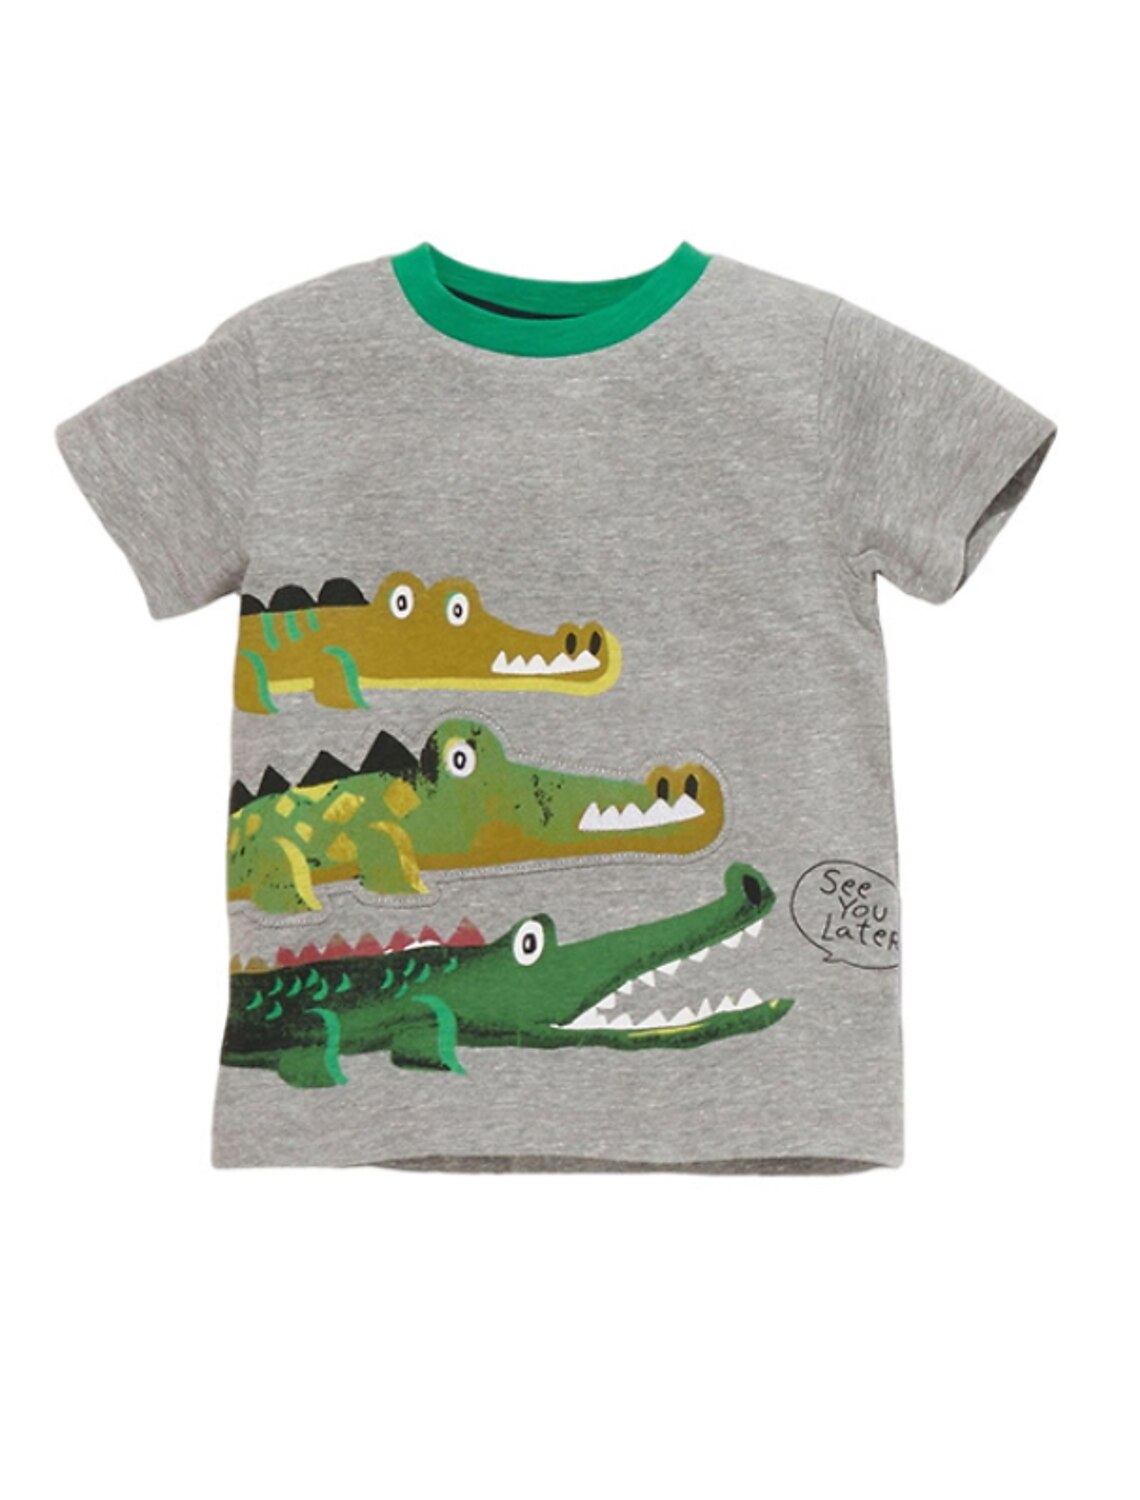 Boys Grey T Shirt Later Alligator Animal Short Sleeve Top Ages 2-8 Free P+P 